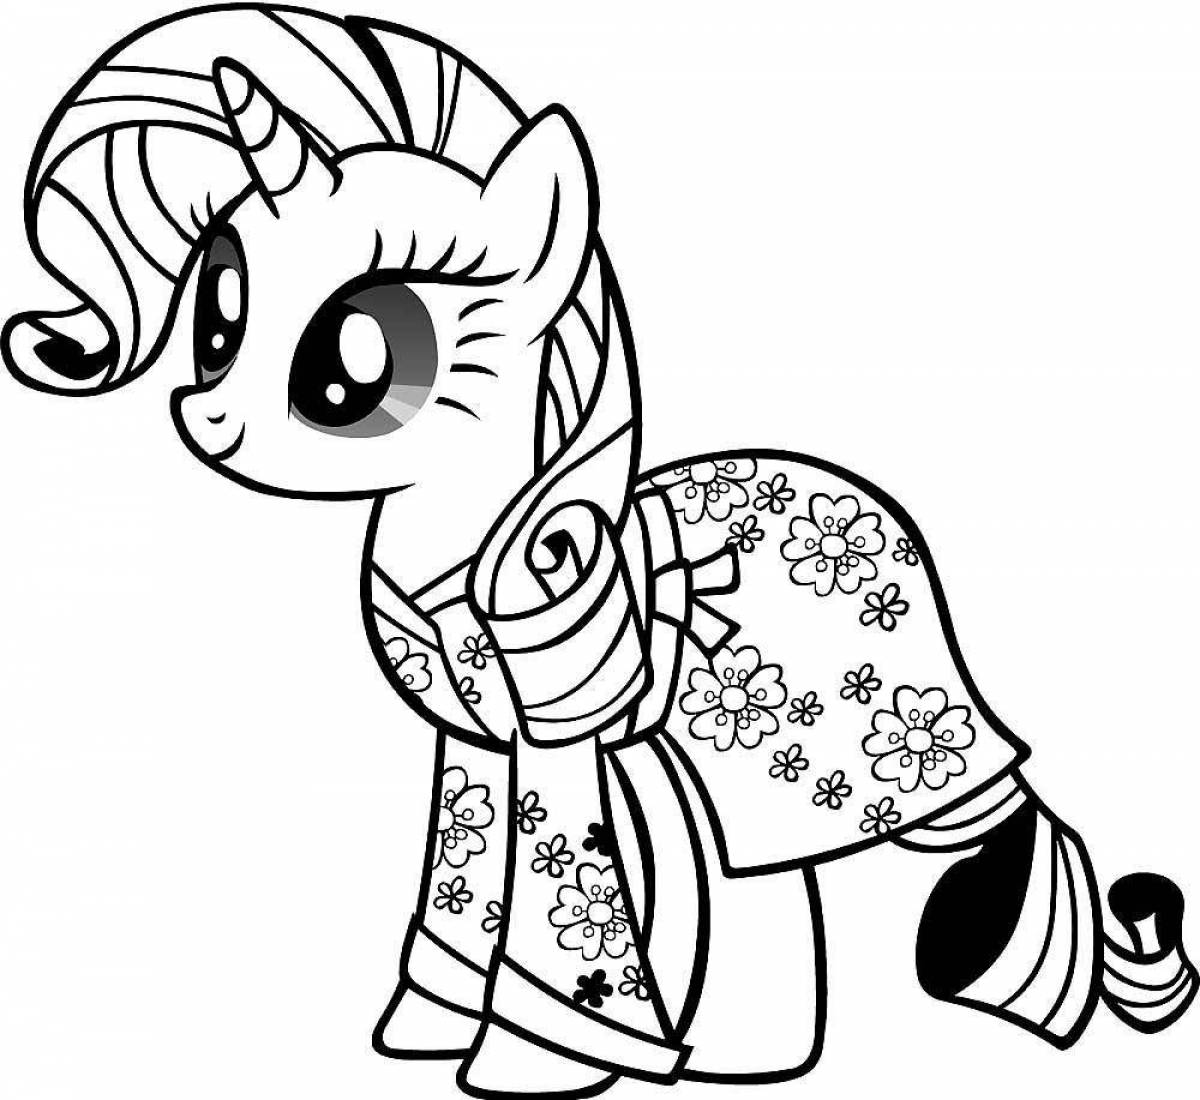 Fairytale pony coloring book